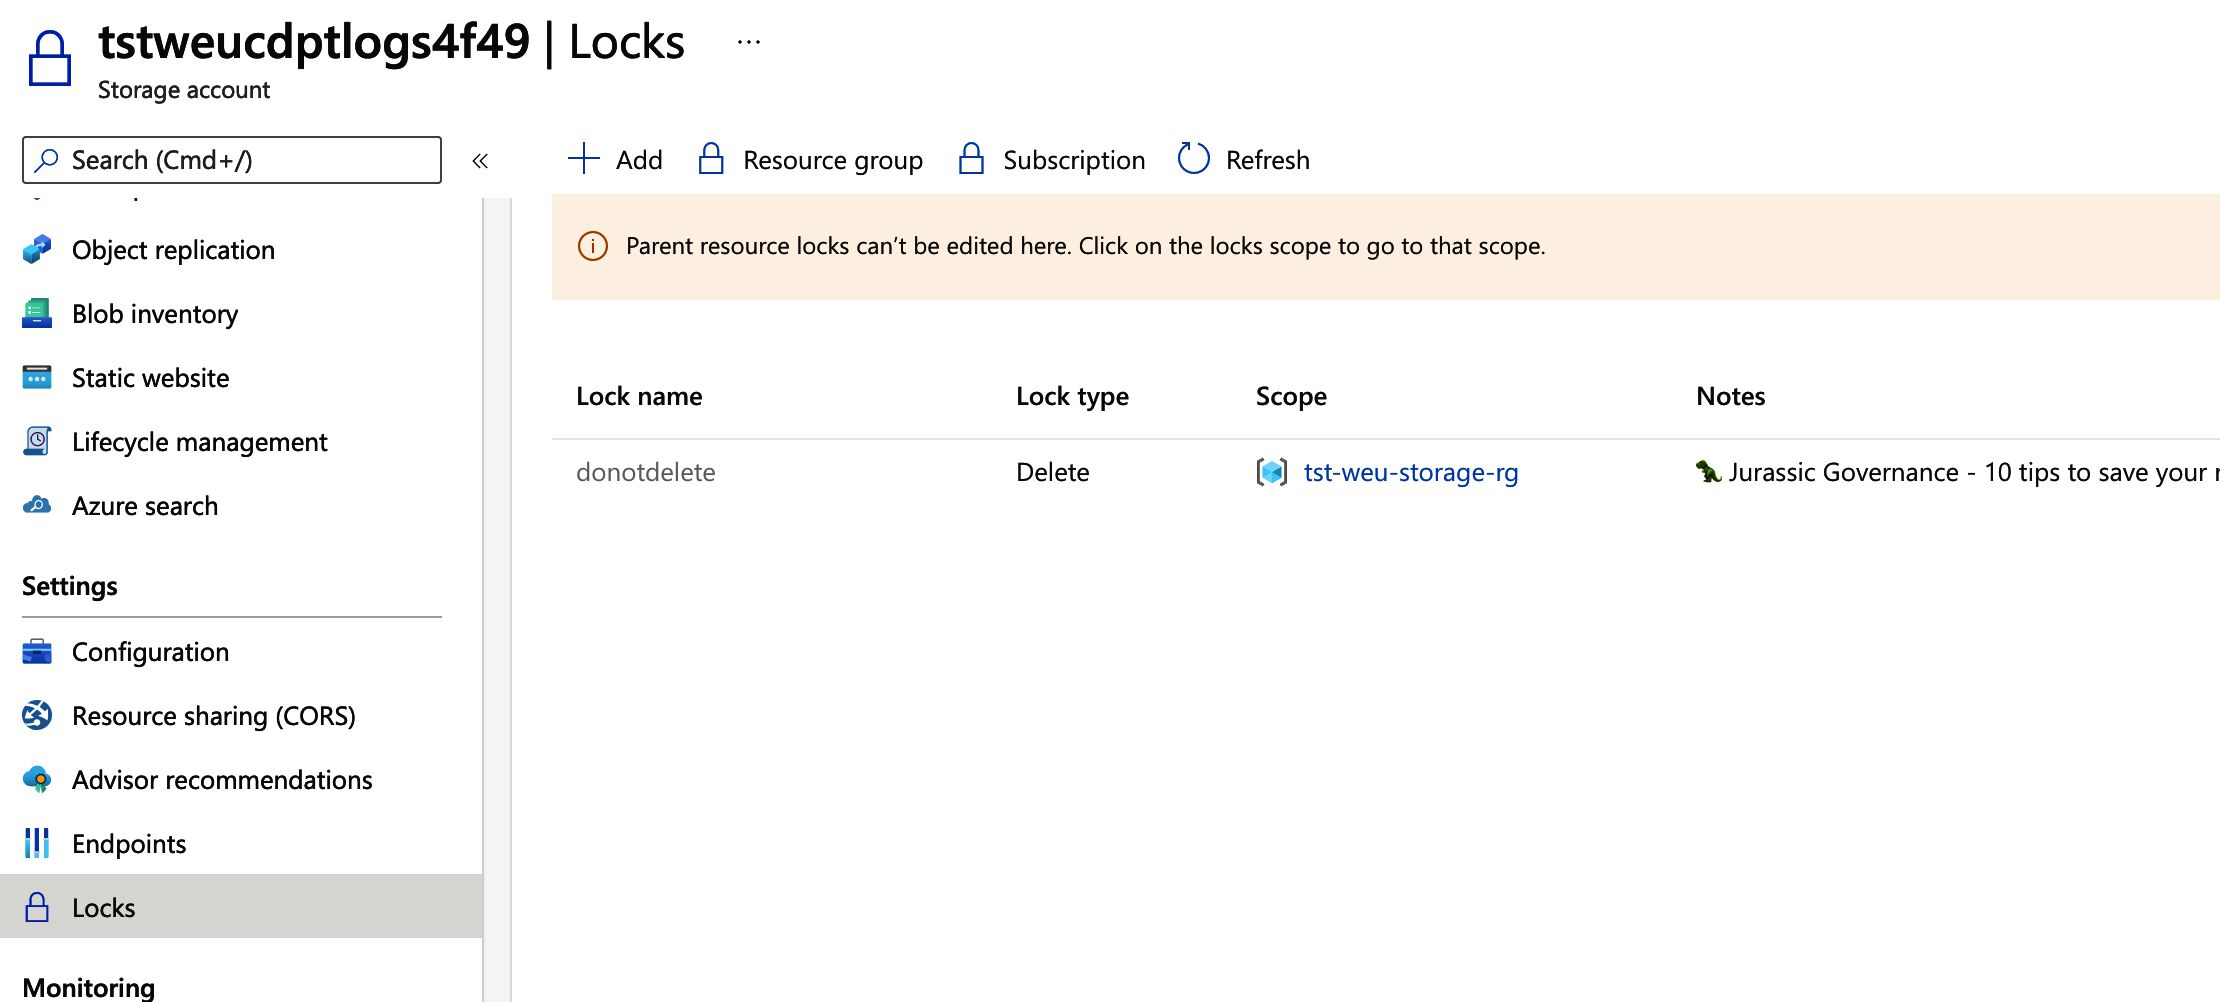 Image of the storage account locks settings view in the Azure Portal, a do not delete entry is listed. This entry its scope set to ‘tst-weu-storage-rg’. A message is also visible above the locks list, it reads: “Parent resource locks can’t be edited here. Click on the locks scope to go to that scope.